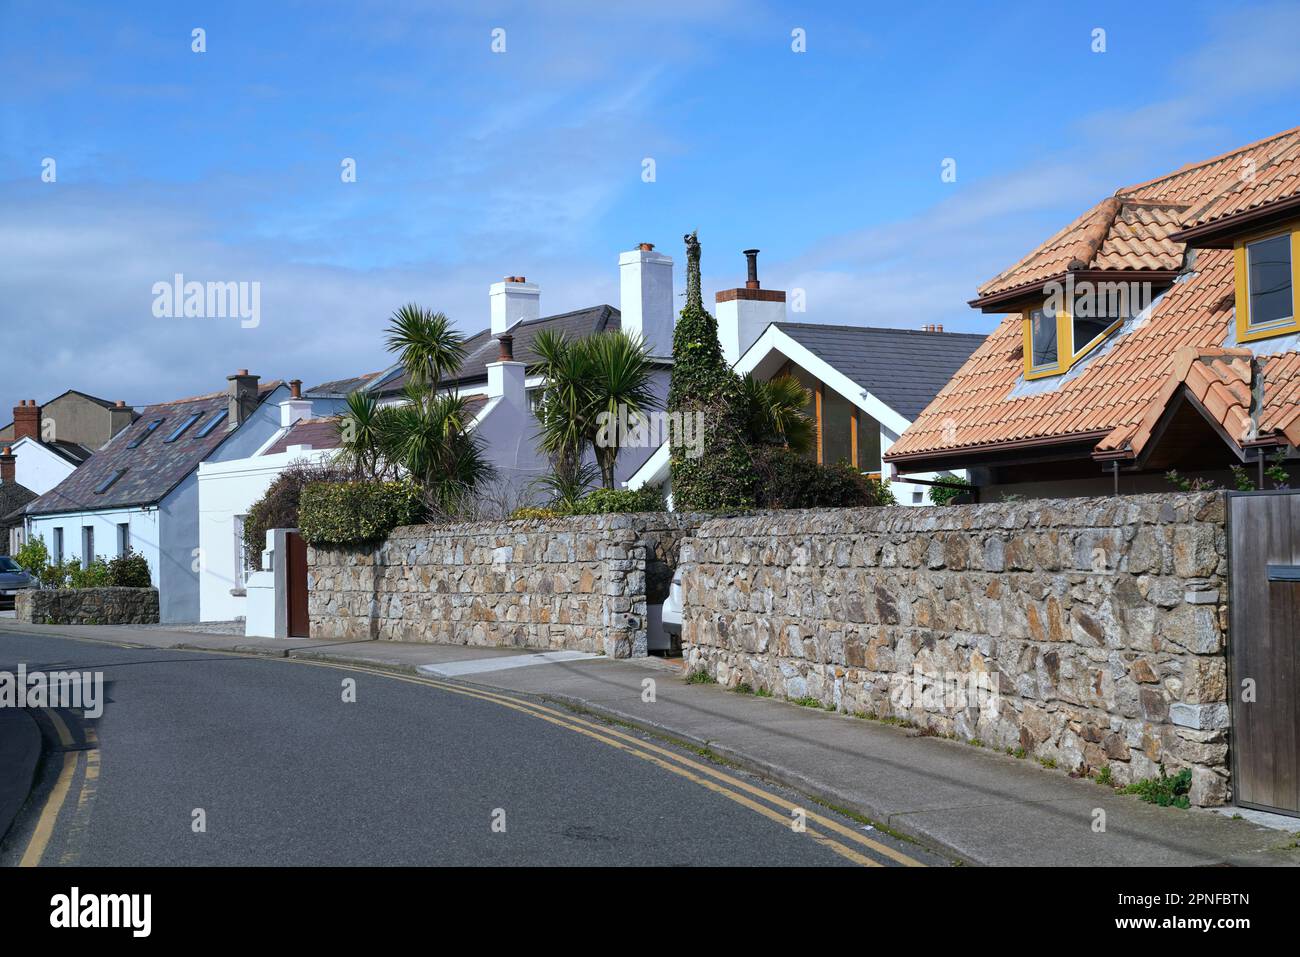 Curving suburban street with villa type houses in a seaside town Stock Photo